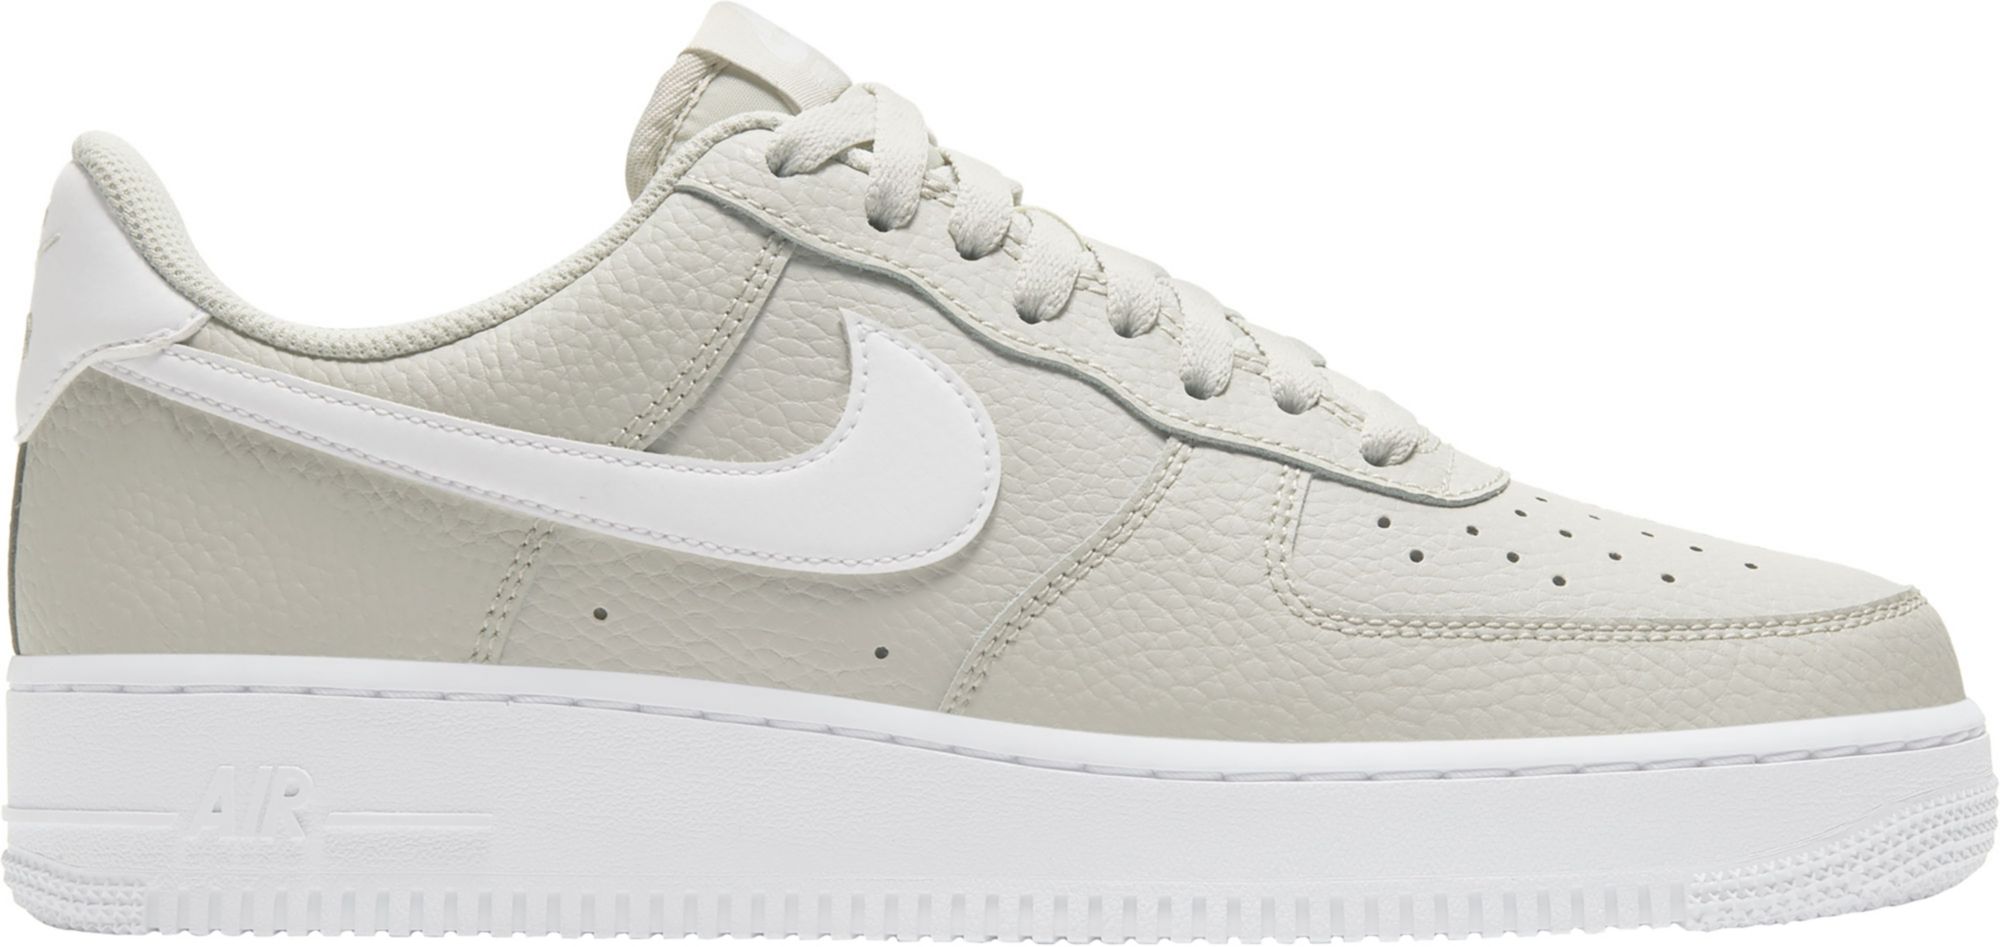 how much are men's air force ones